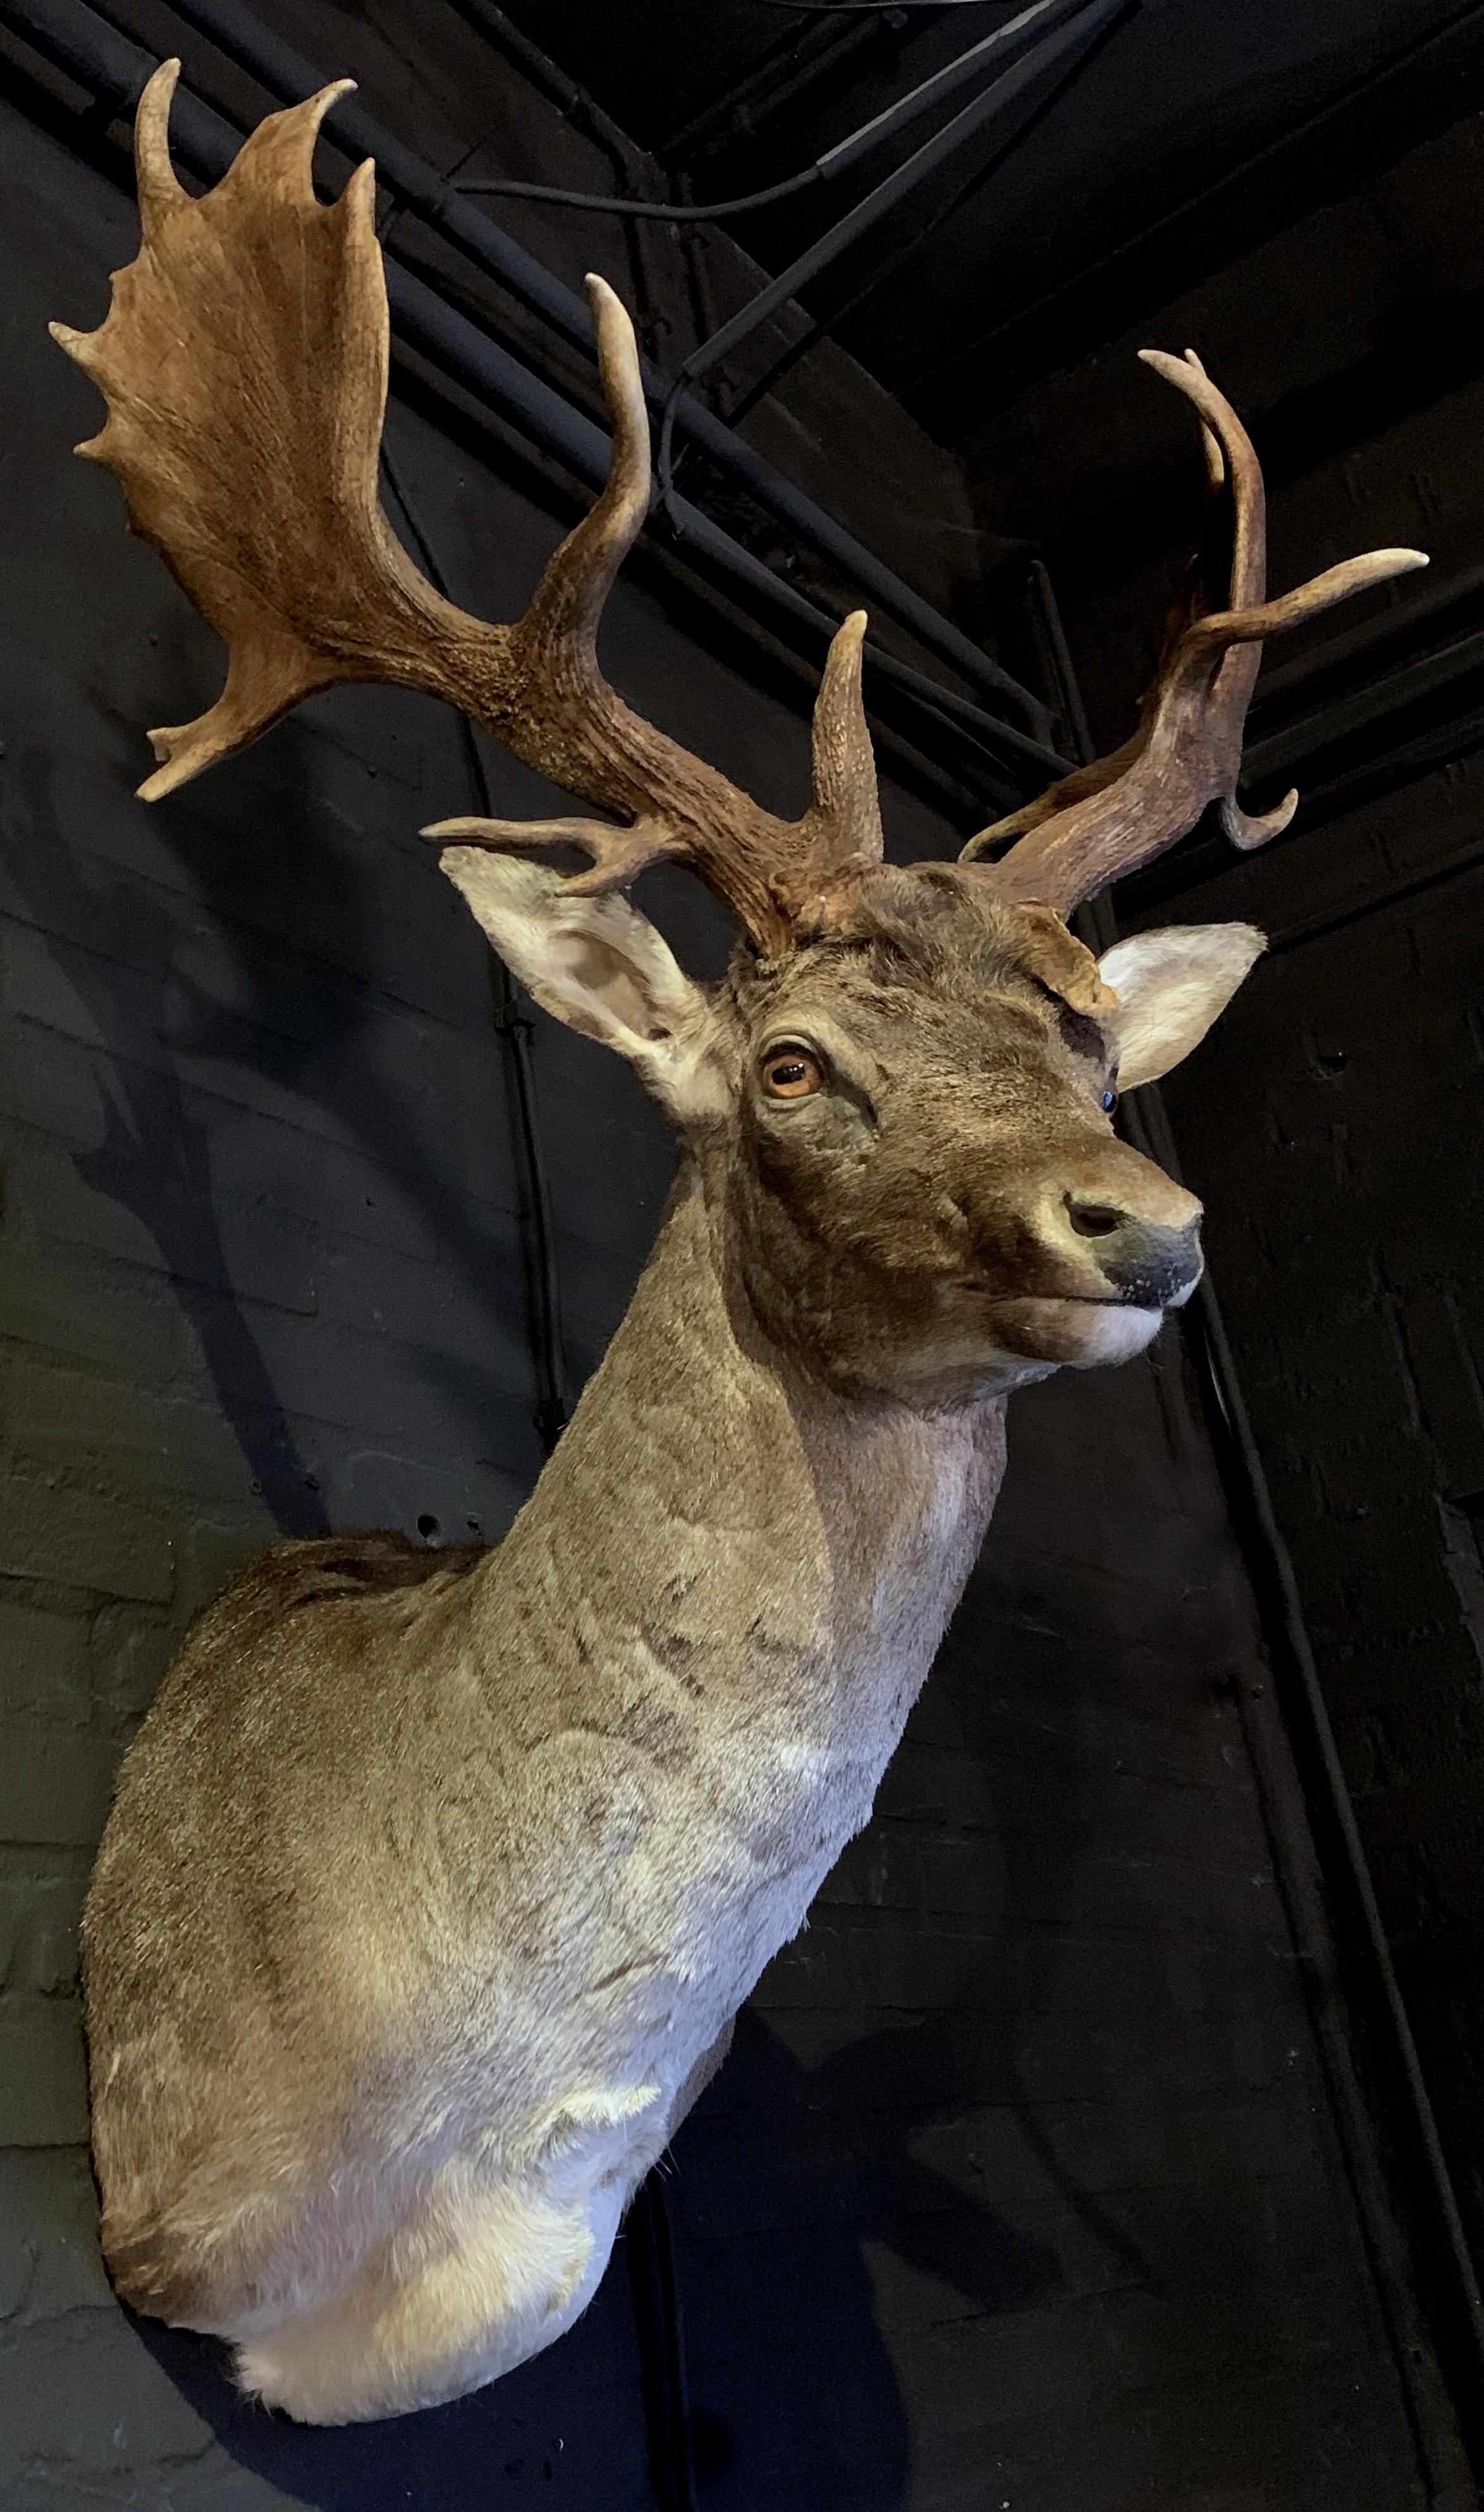 This fallow deer has an extreme capital pair of antlers. The fallow deer has recently been made and is a real collector's item.